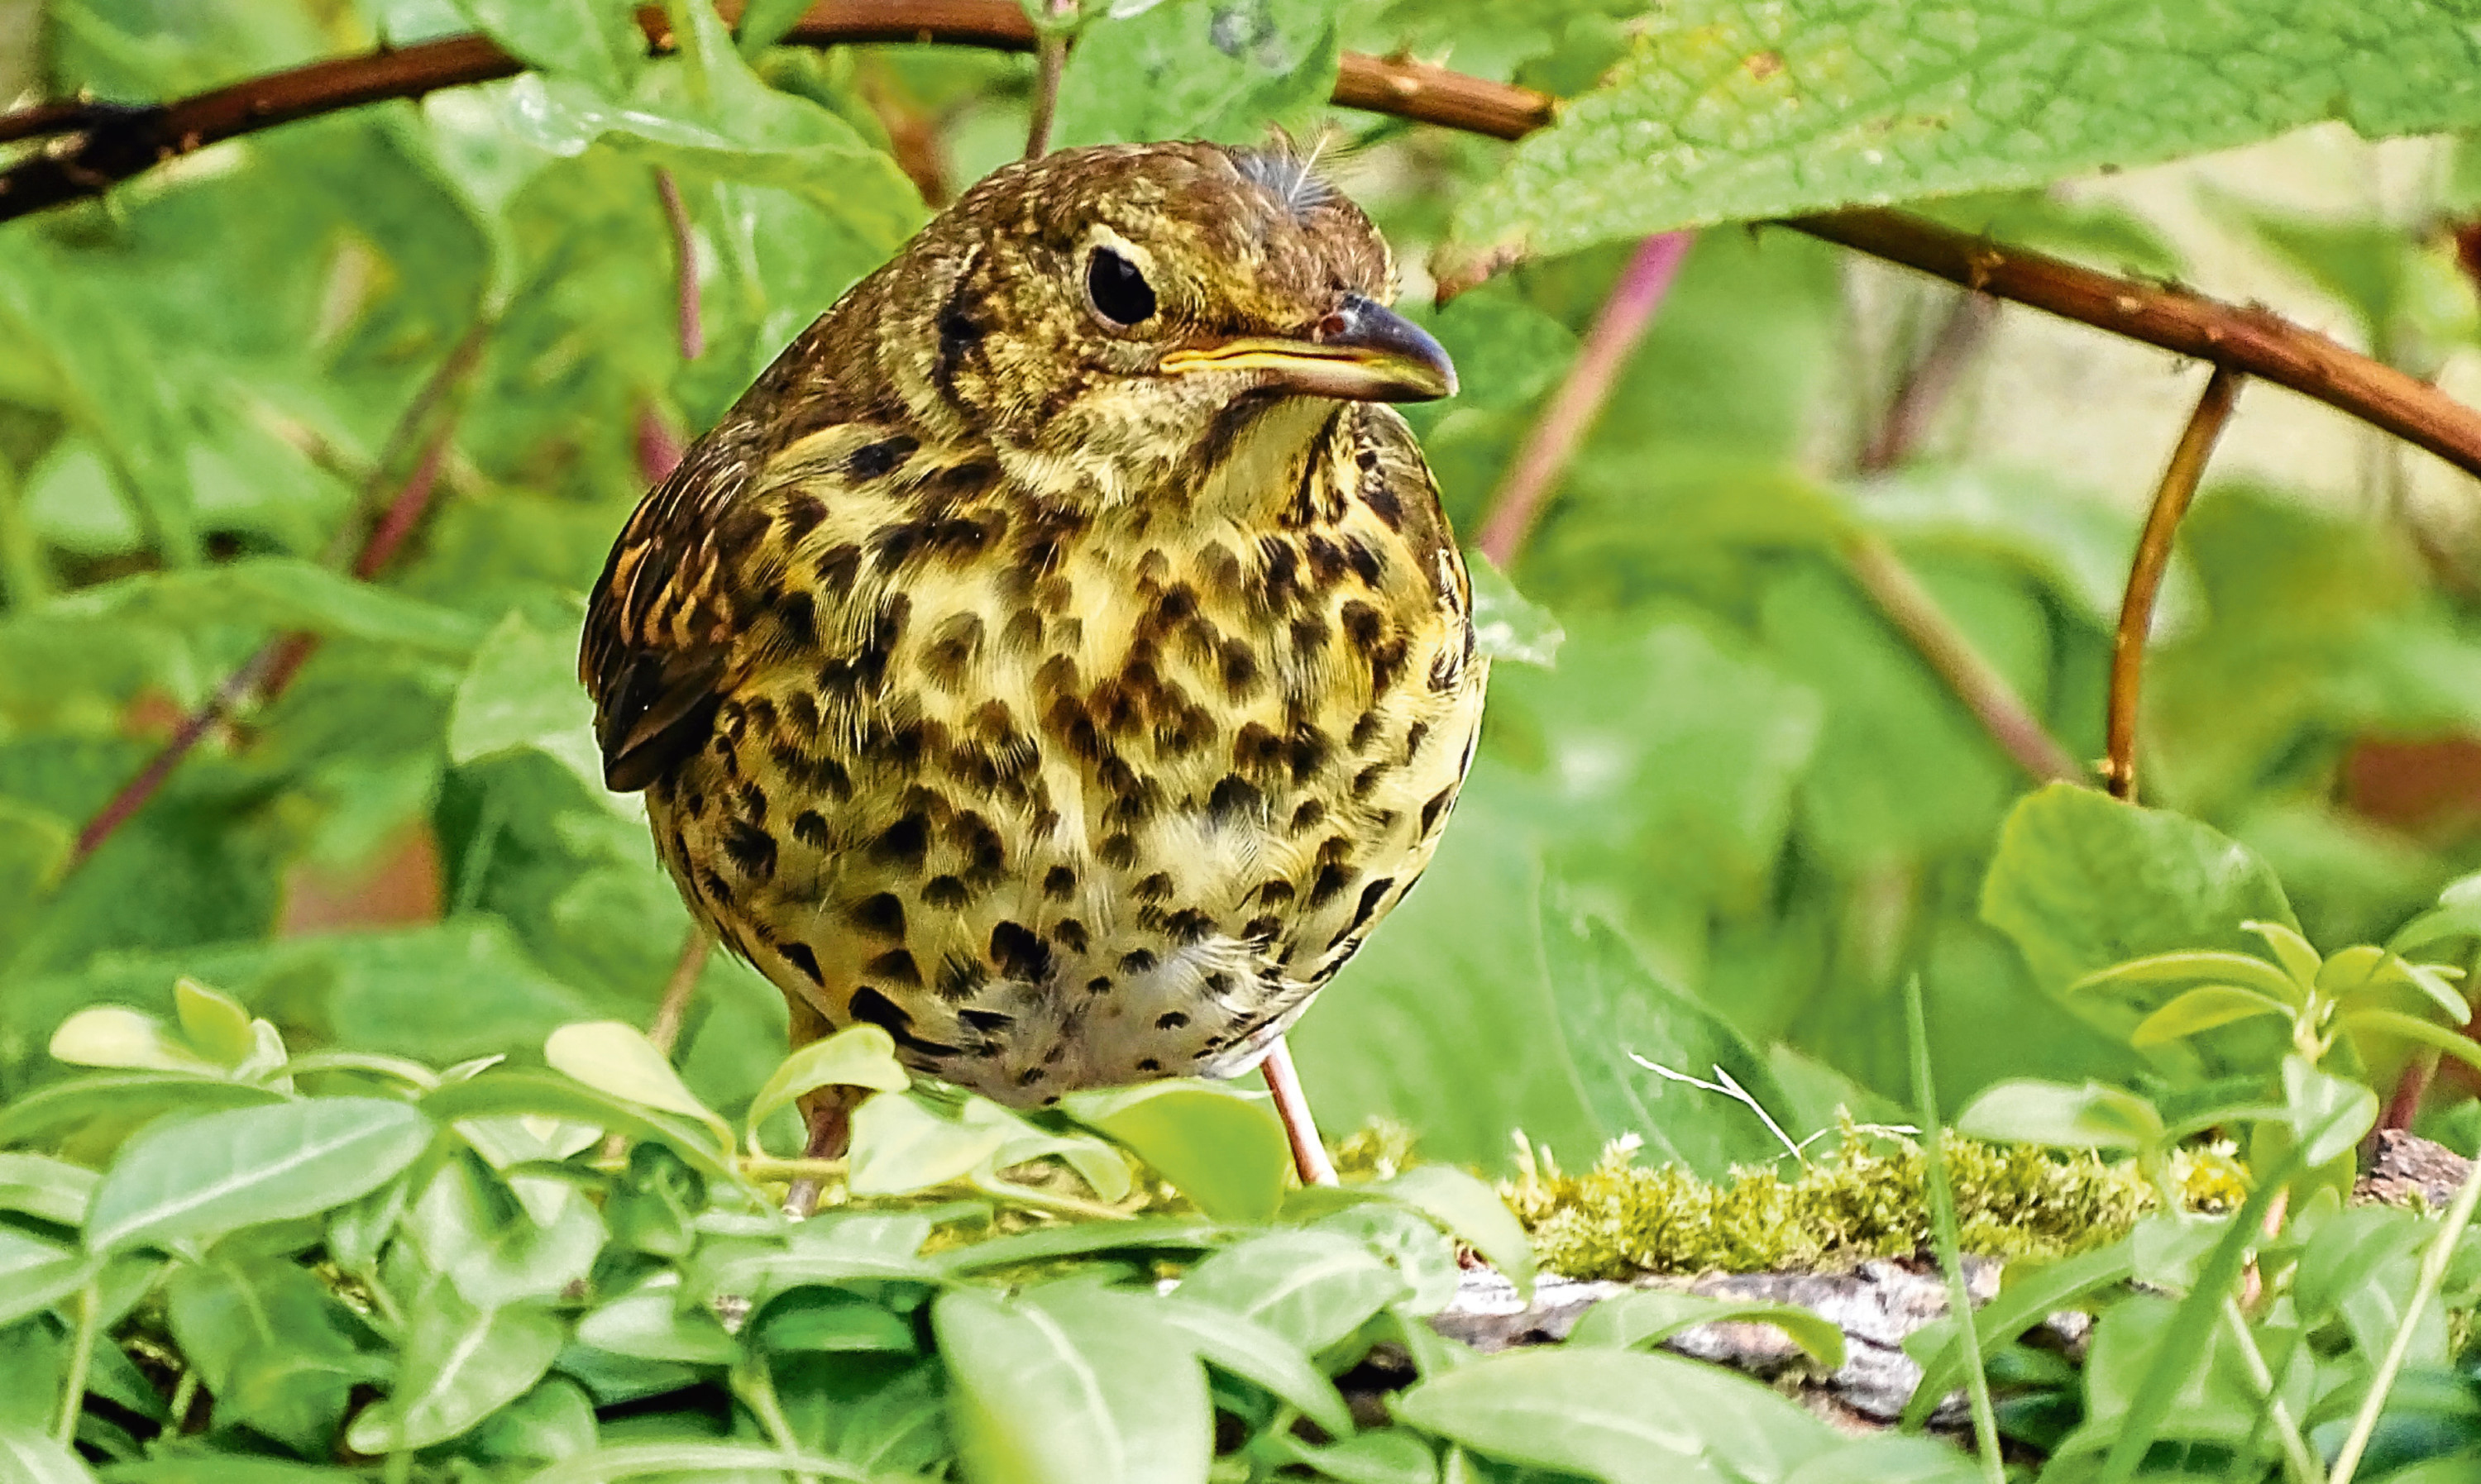 The thrush Jim Crumley nursed back to health after it collided with his french windows.